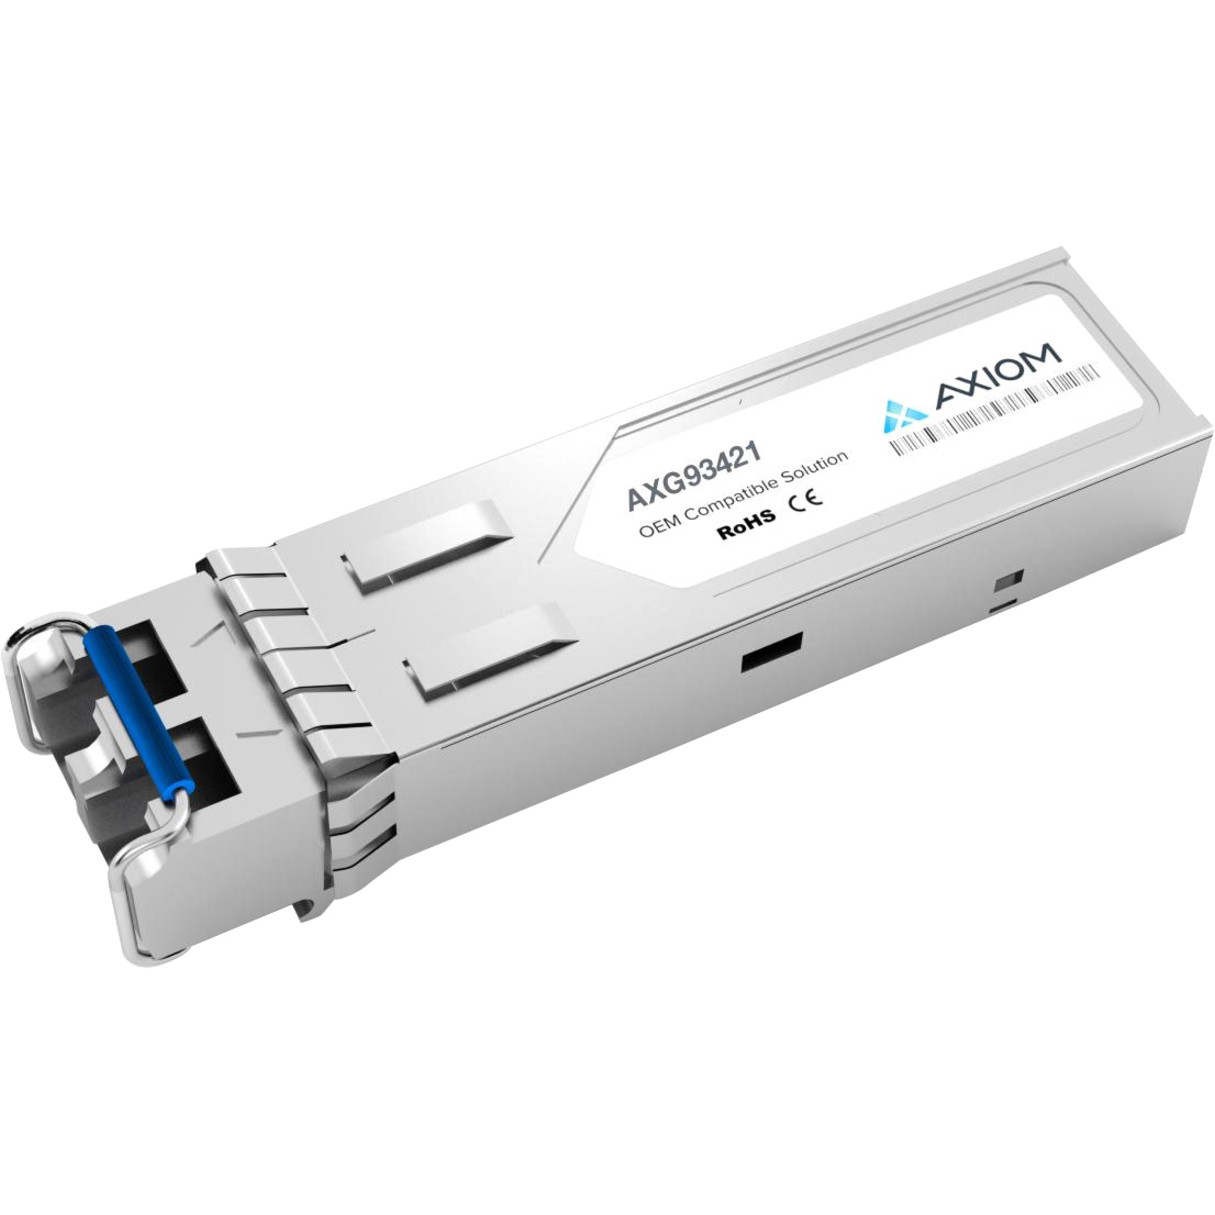 Axiom Memory Solutions 1000BASE-LX SFP Transceiver for MOXASFP-1GLXLCTAA CompliantFor Data Networking, Optical Network1 x 1000Base-LX1 Gbit/s” AXG93421